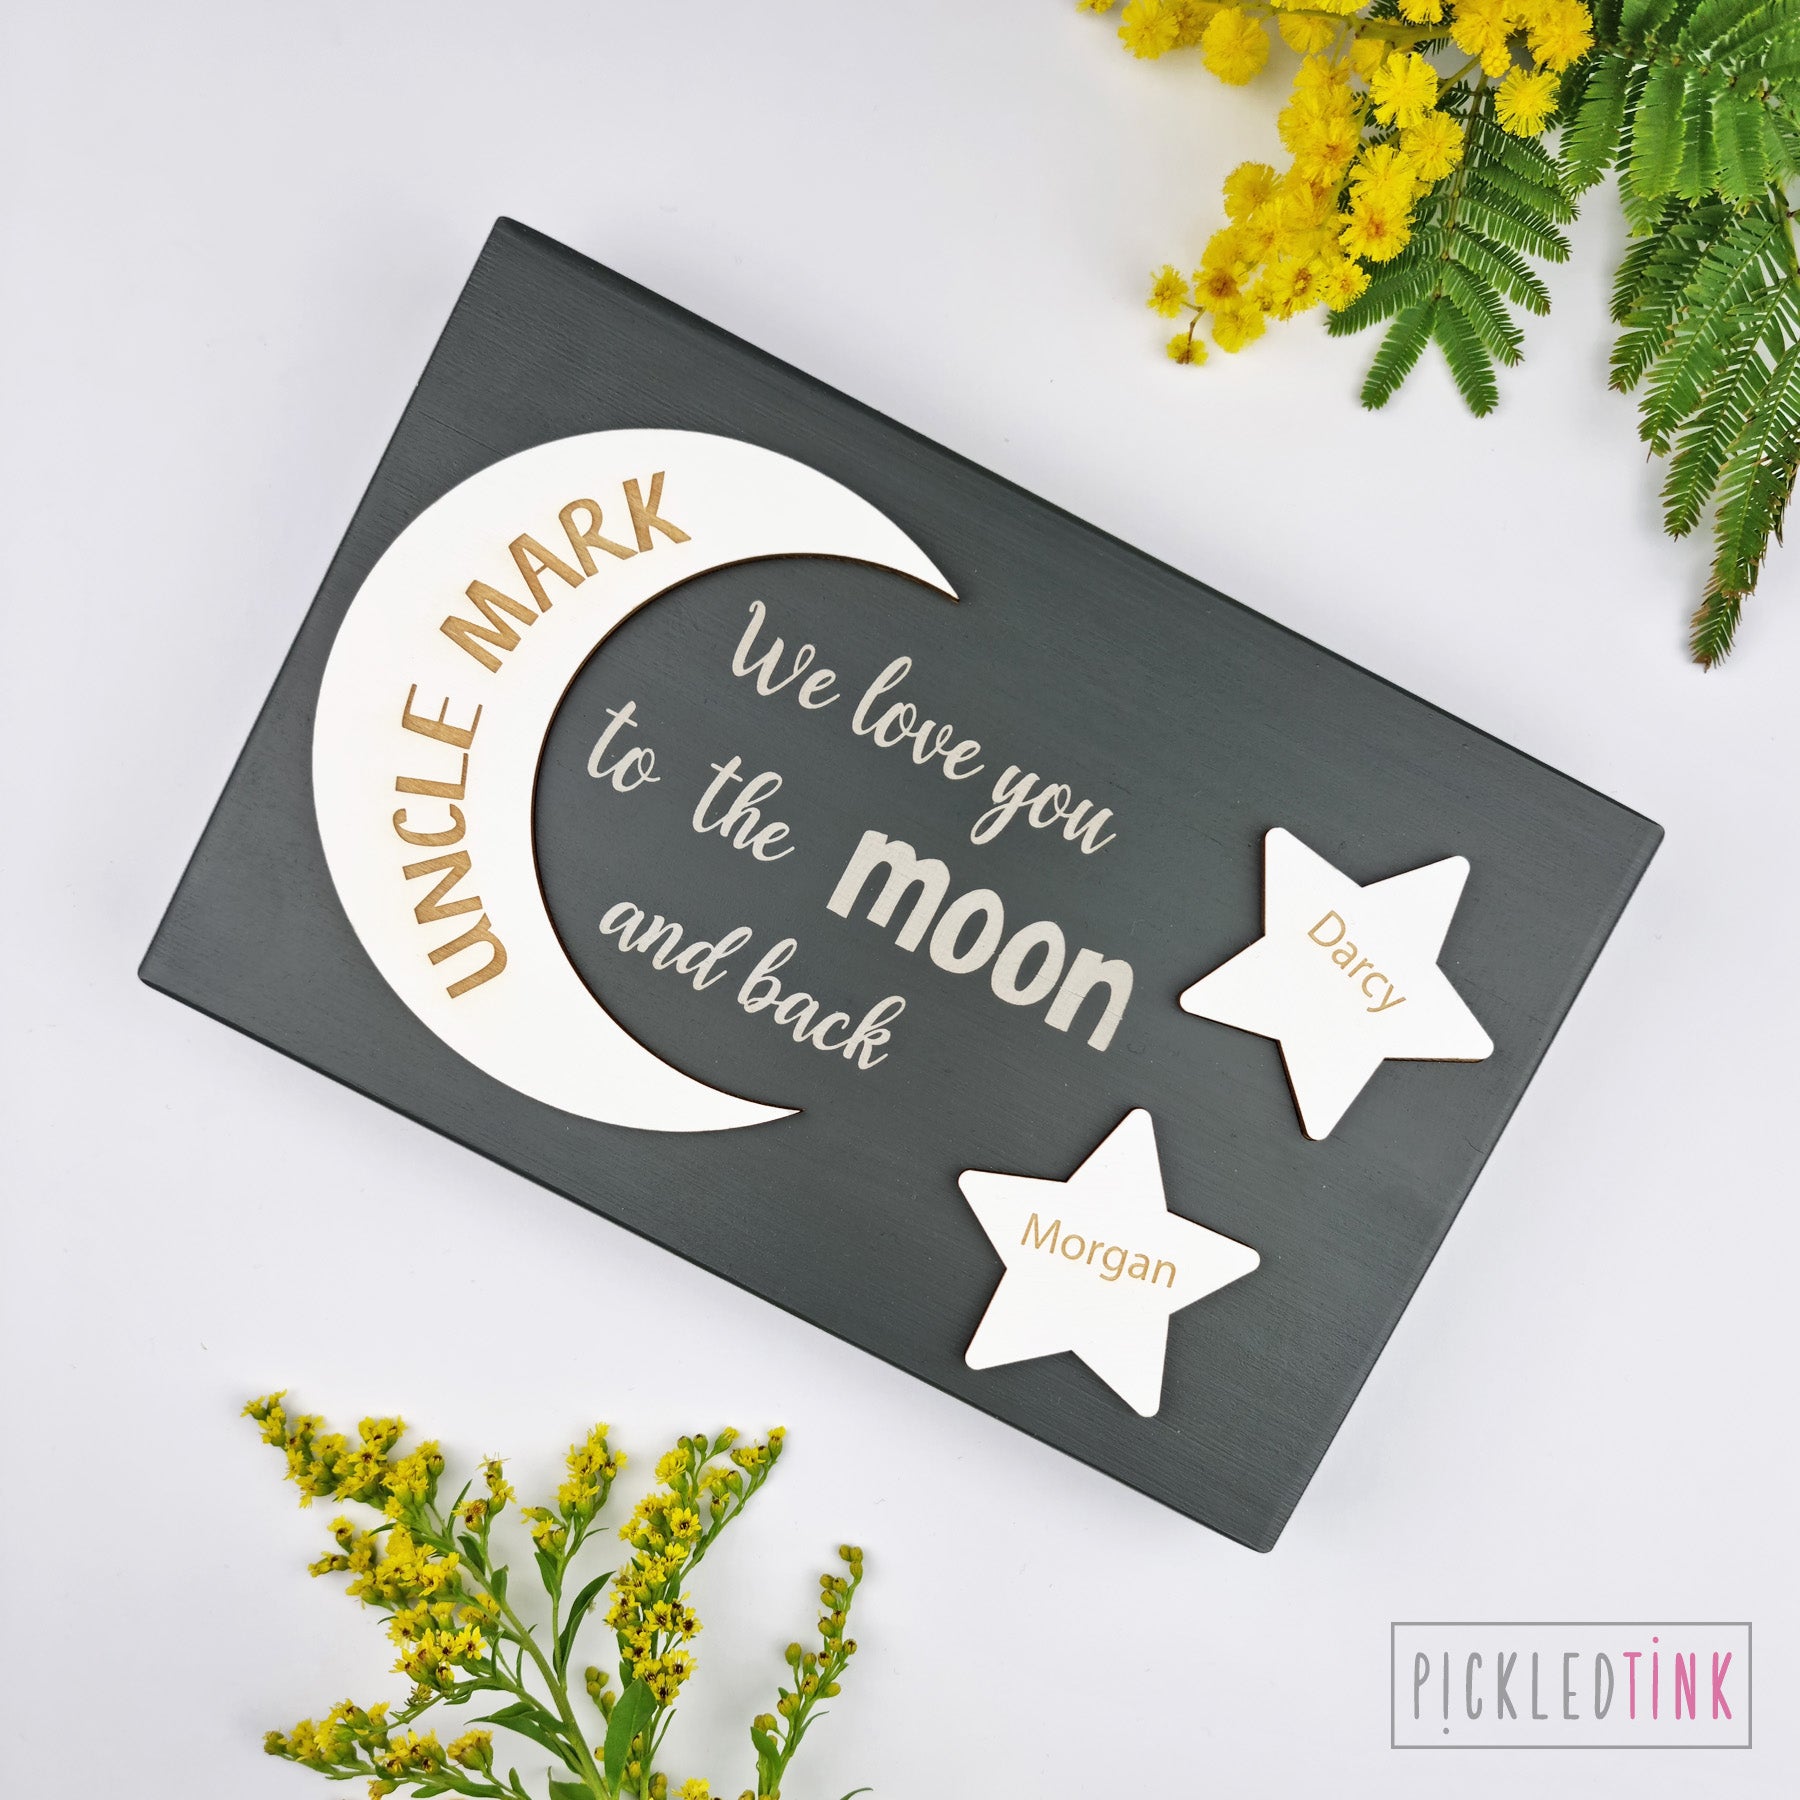 "Love you to the moon and back" Free-standing Block